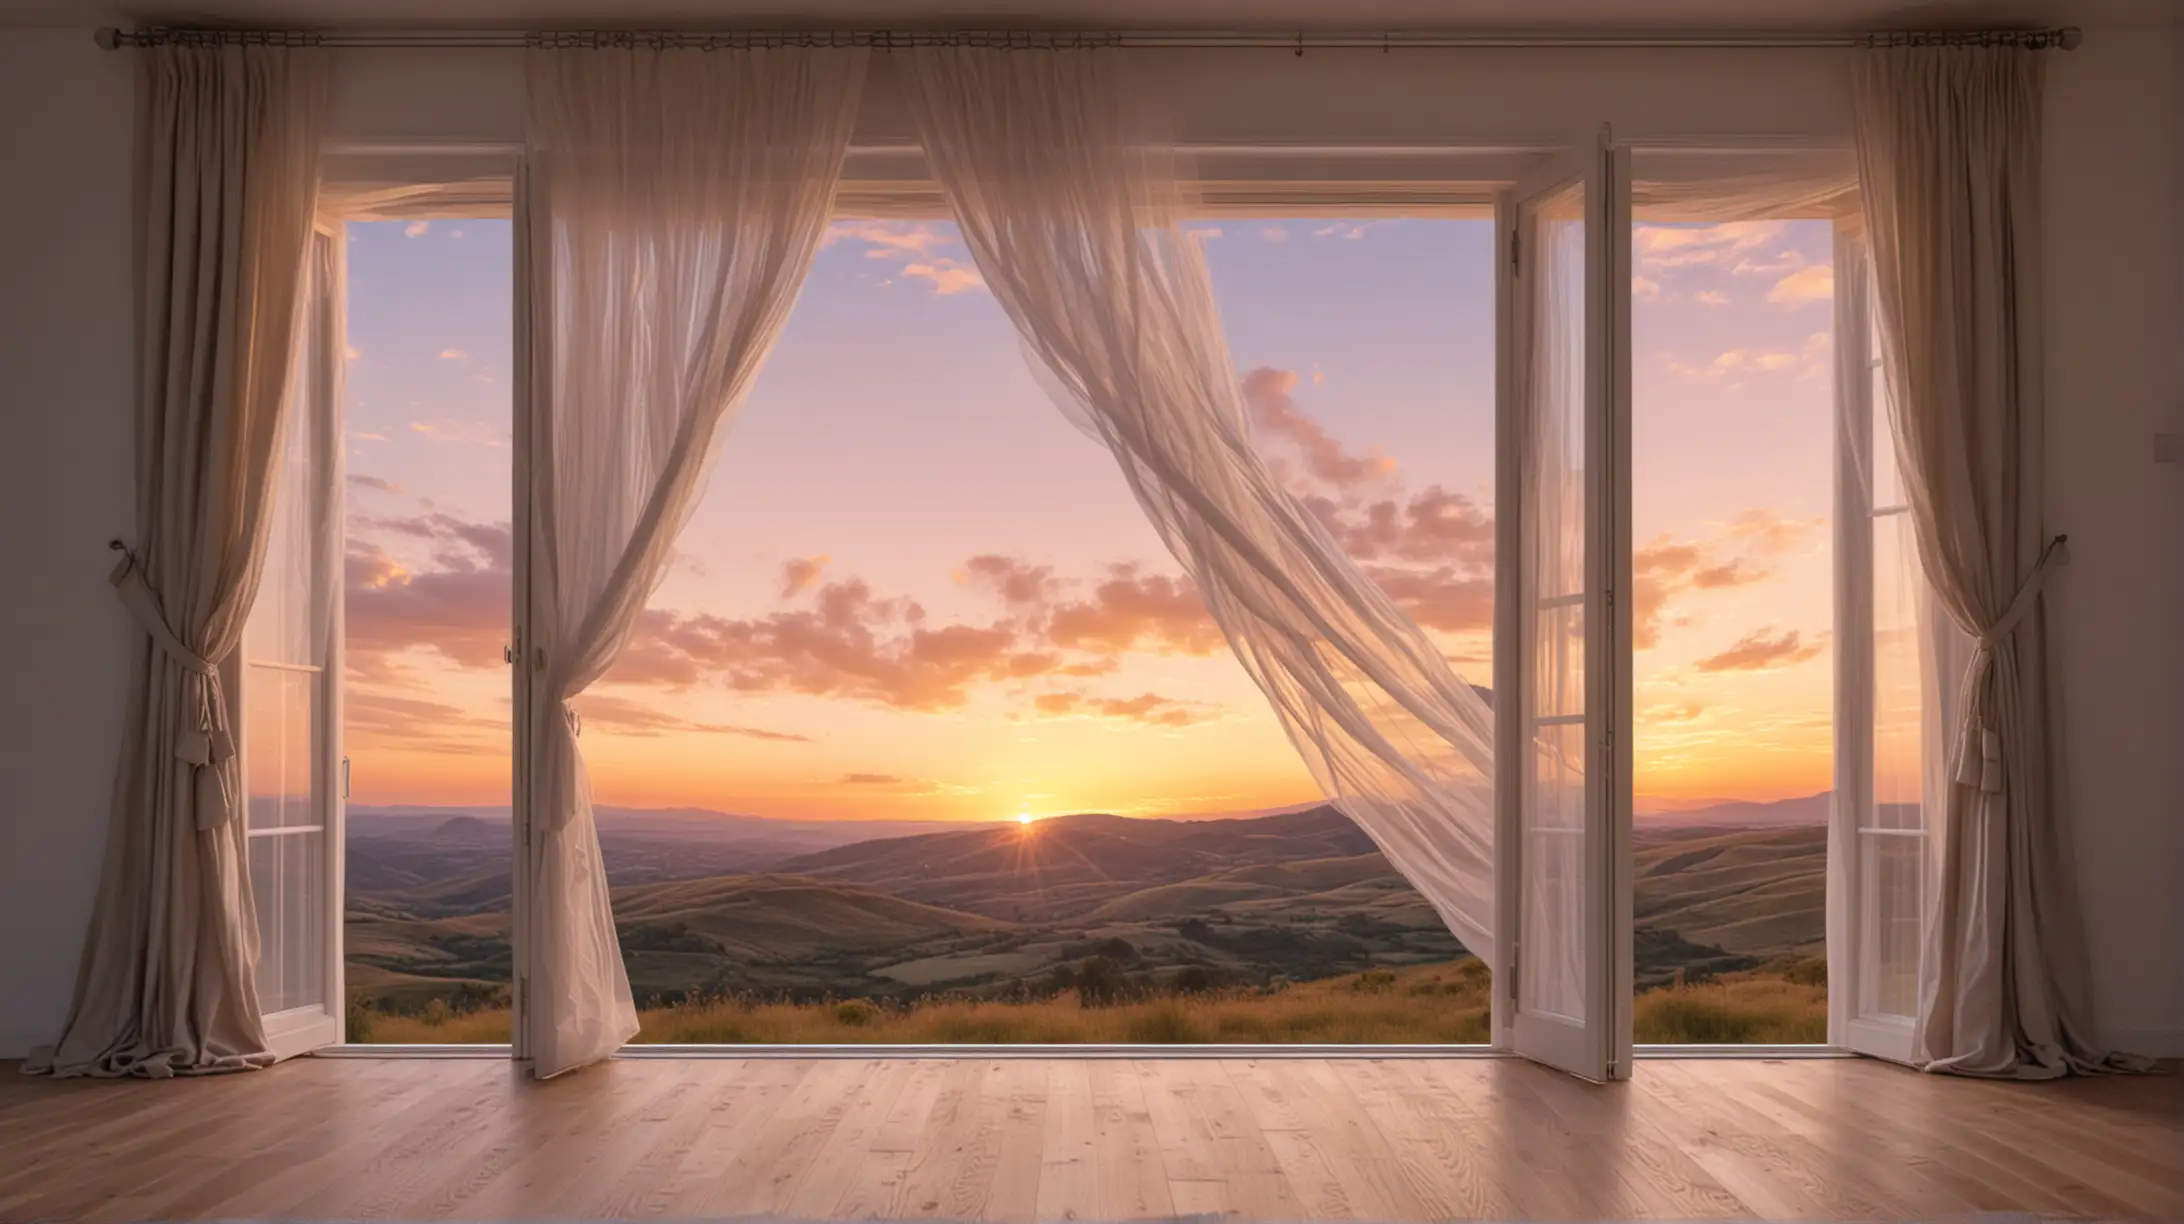 Romantic Sunset Window Structure with Flying Curtains and Open Doors